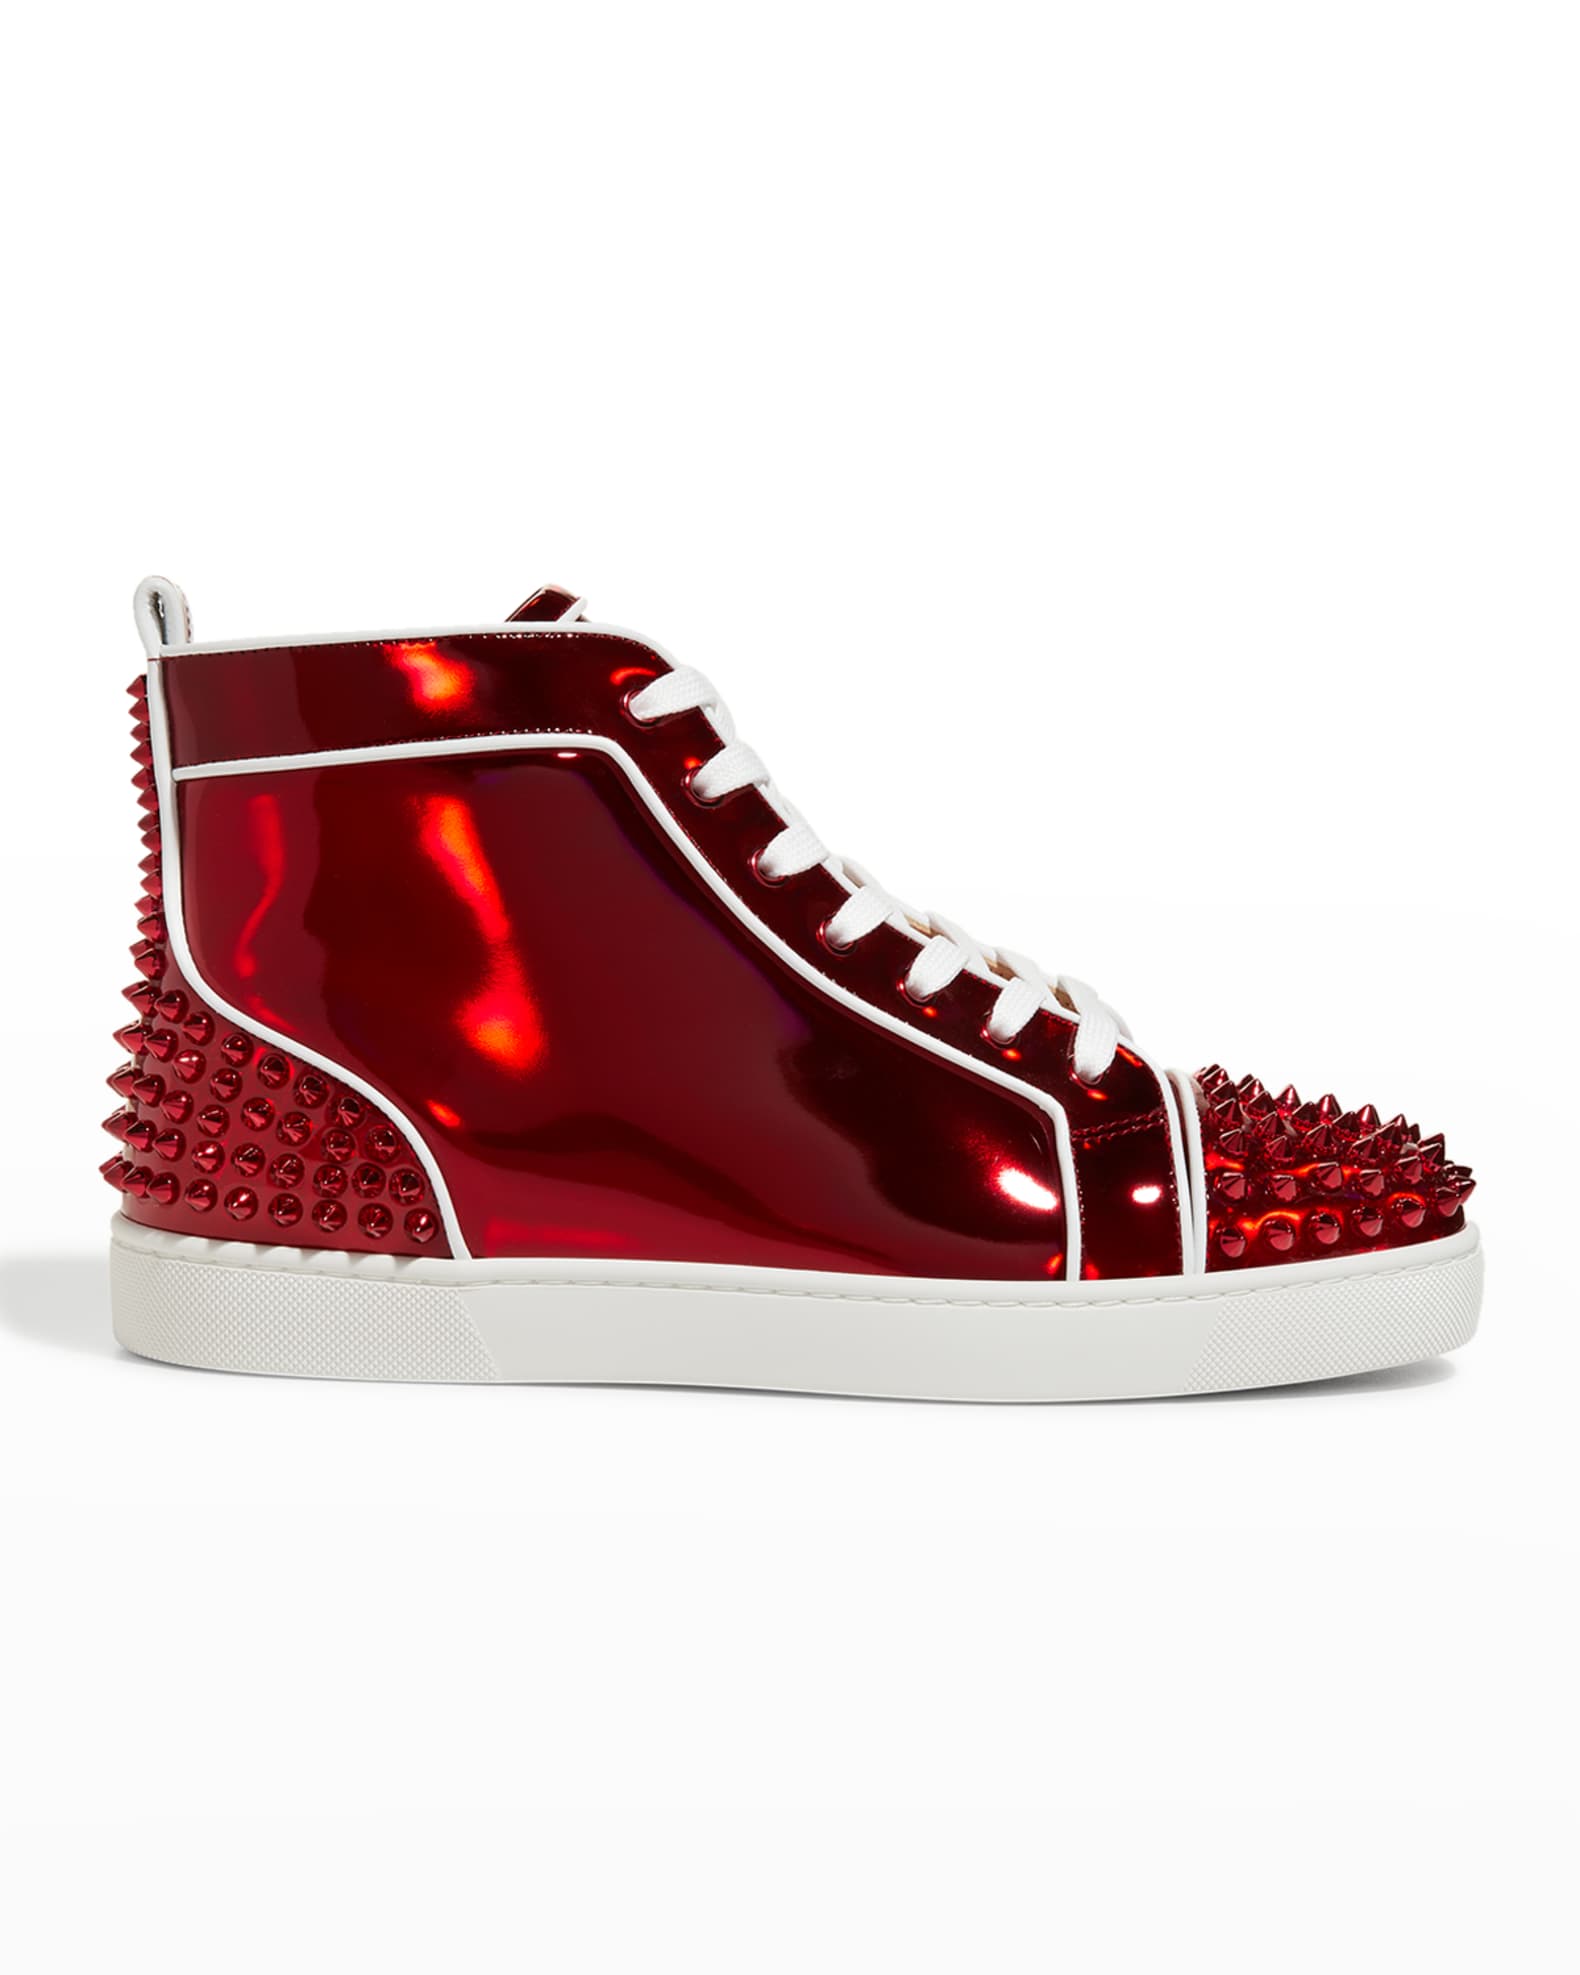 Men's Lou Spikes 2 Patent Leather High-Top Sneakers